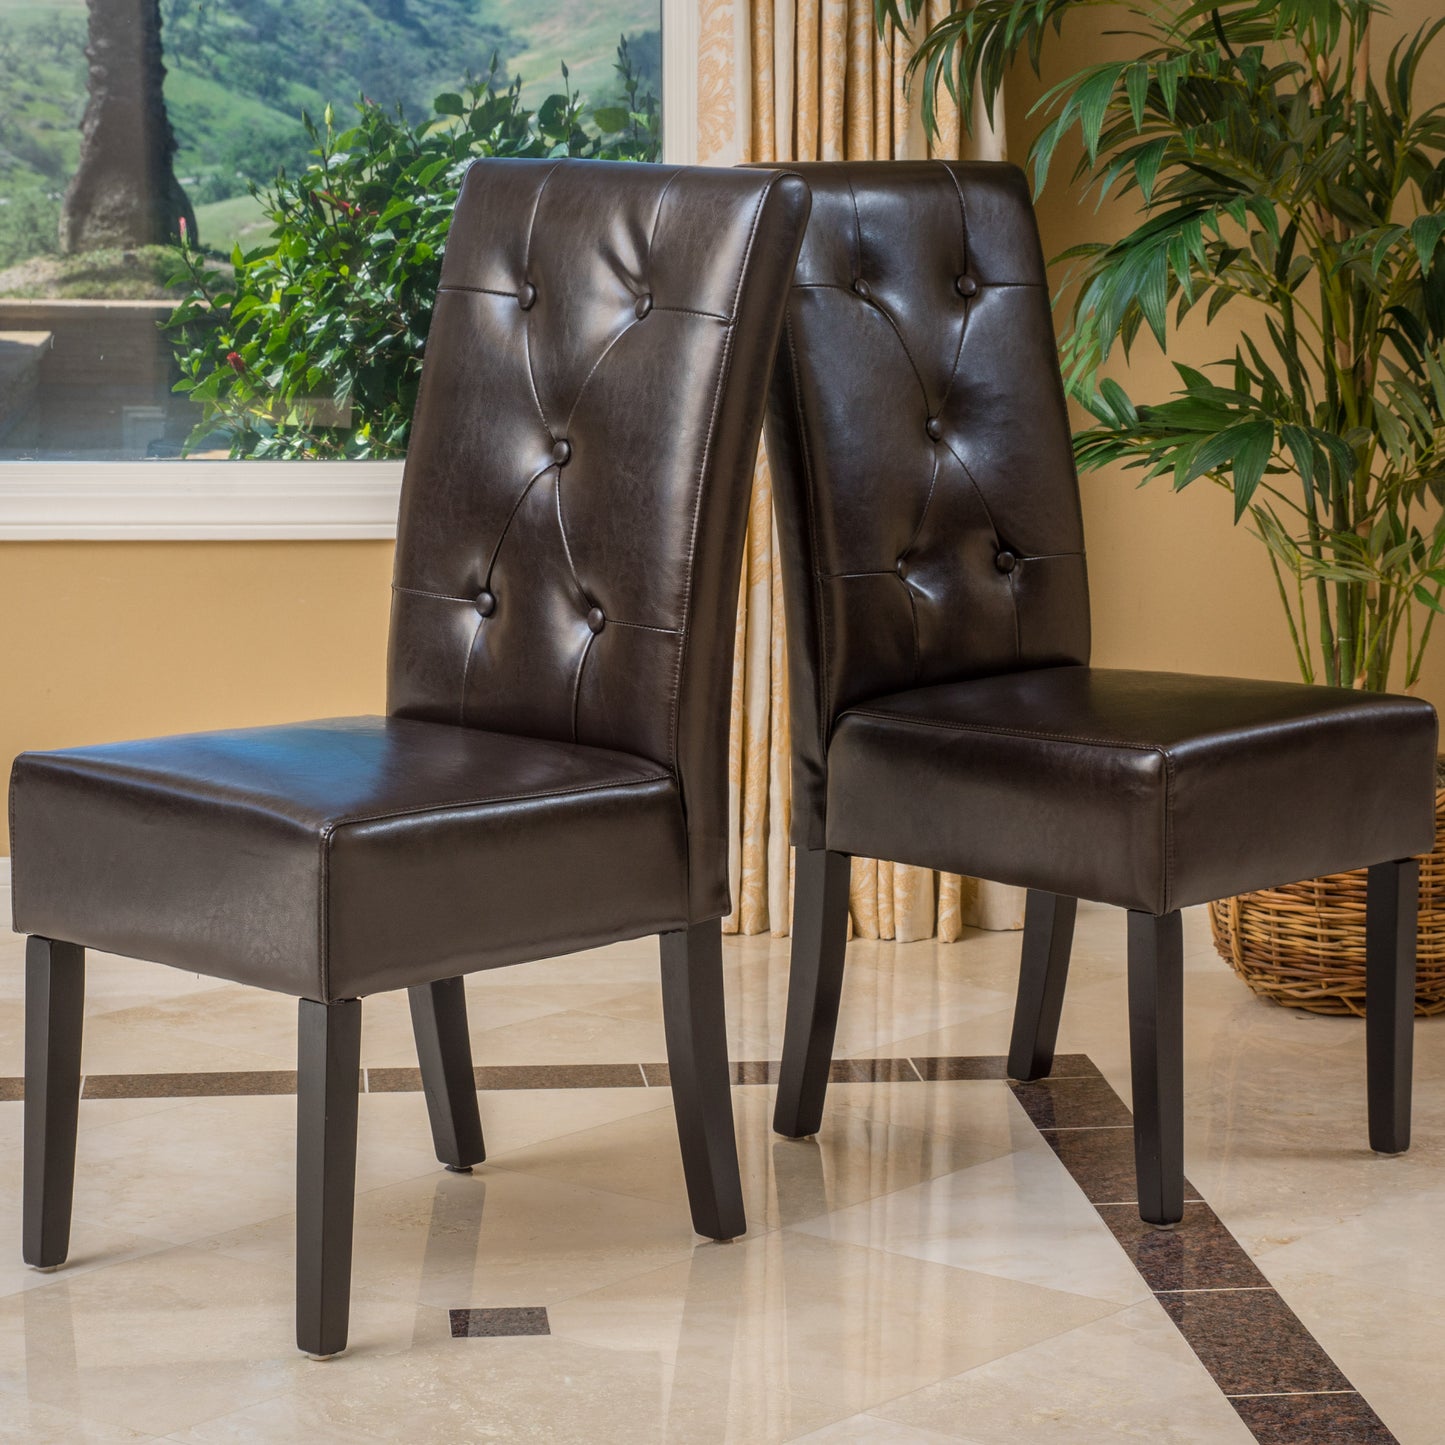 Percival T-Stitch Bonded Leather Dining Chairs (Set of 2)